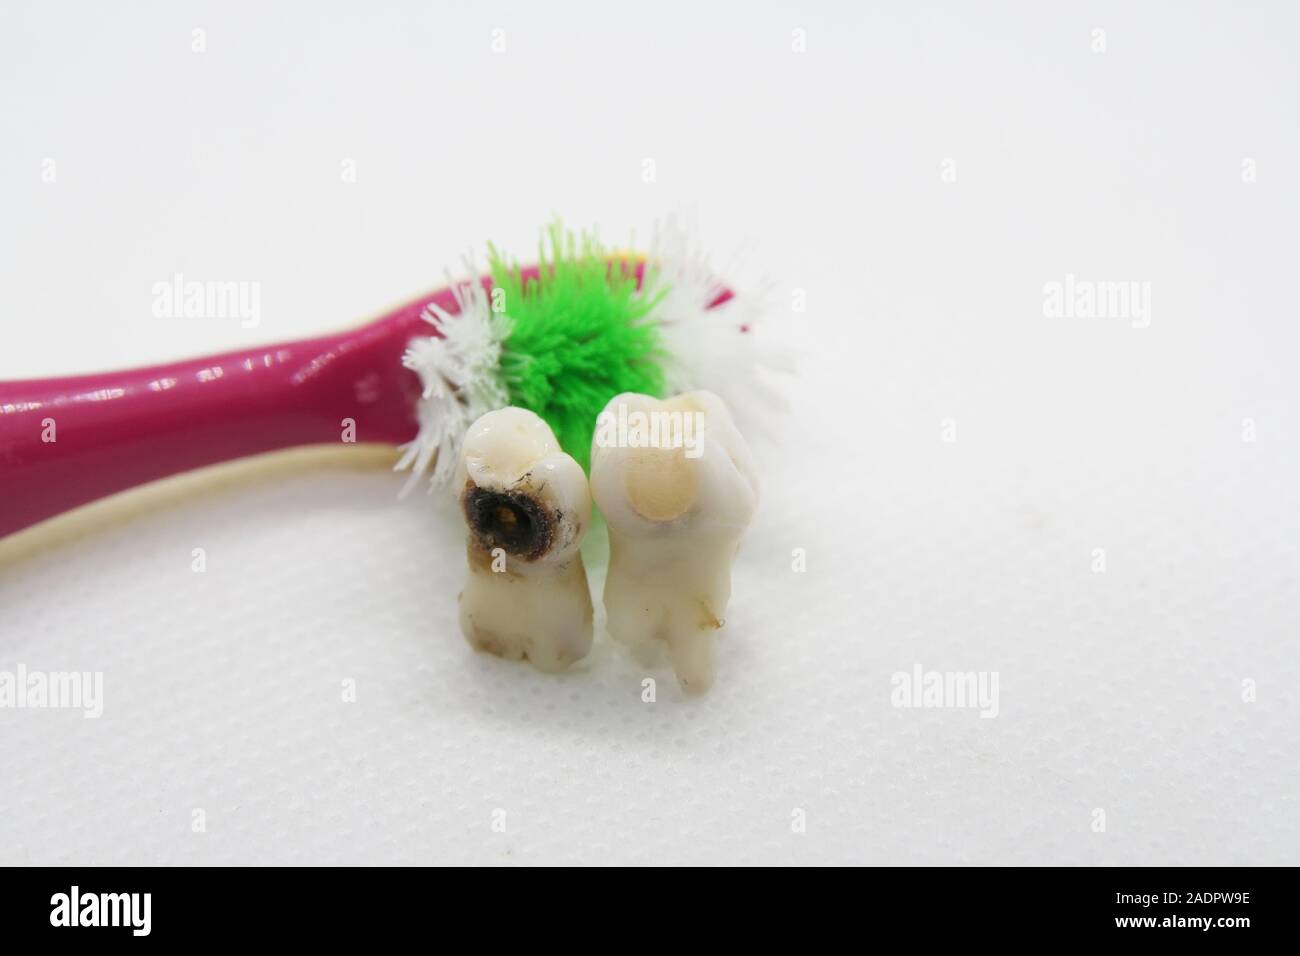 Bad tooth and toothbrush. Dental hygiene. Rotten tooth and toothbrush. Extracted tooth. Stock Photo